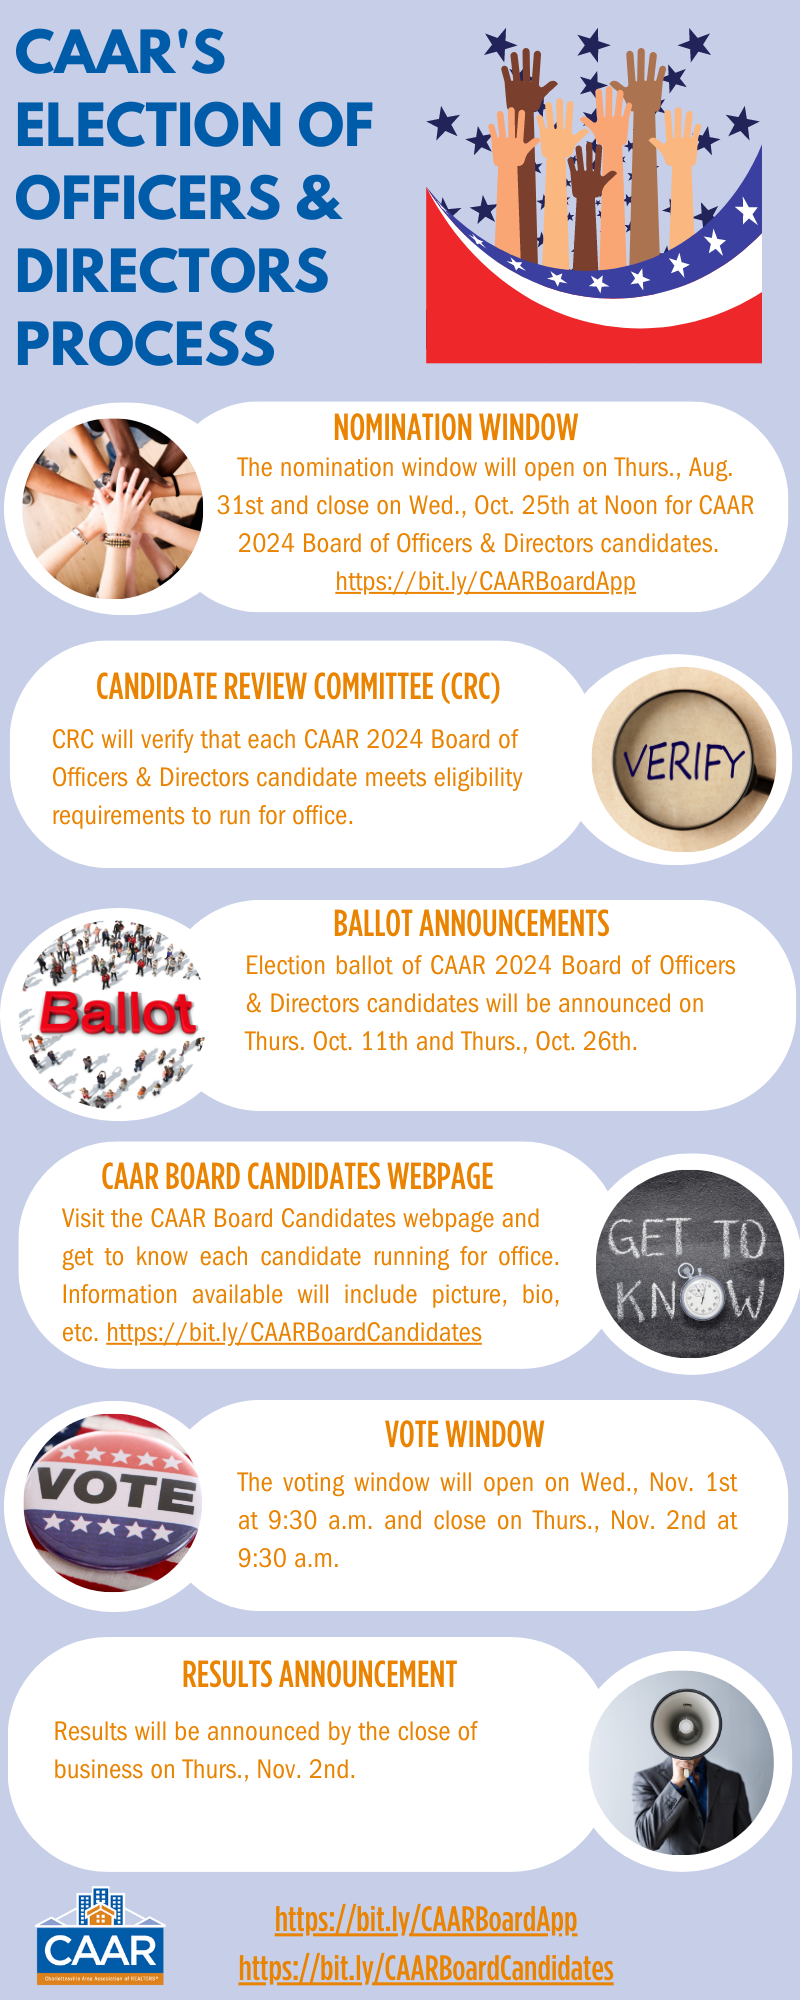 CAAR's Election of Officers & Directors Process Infographic